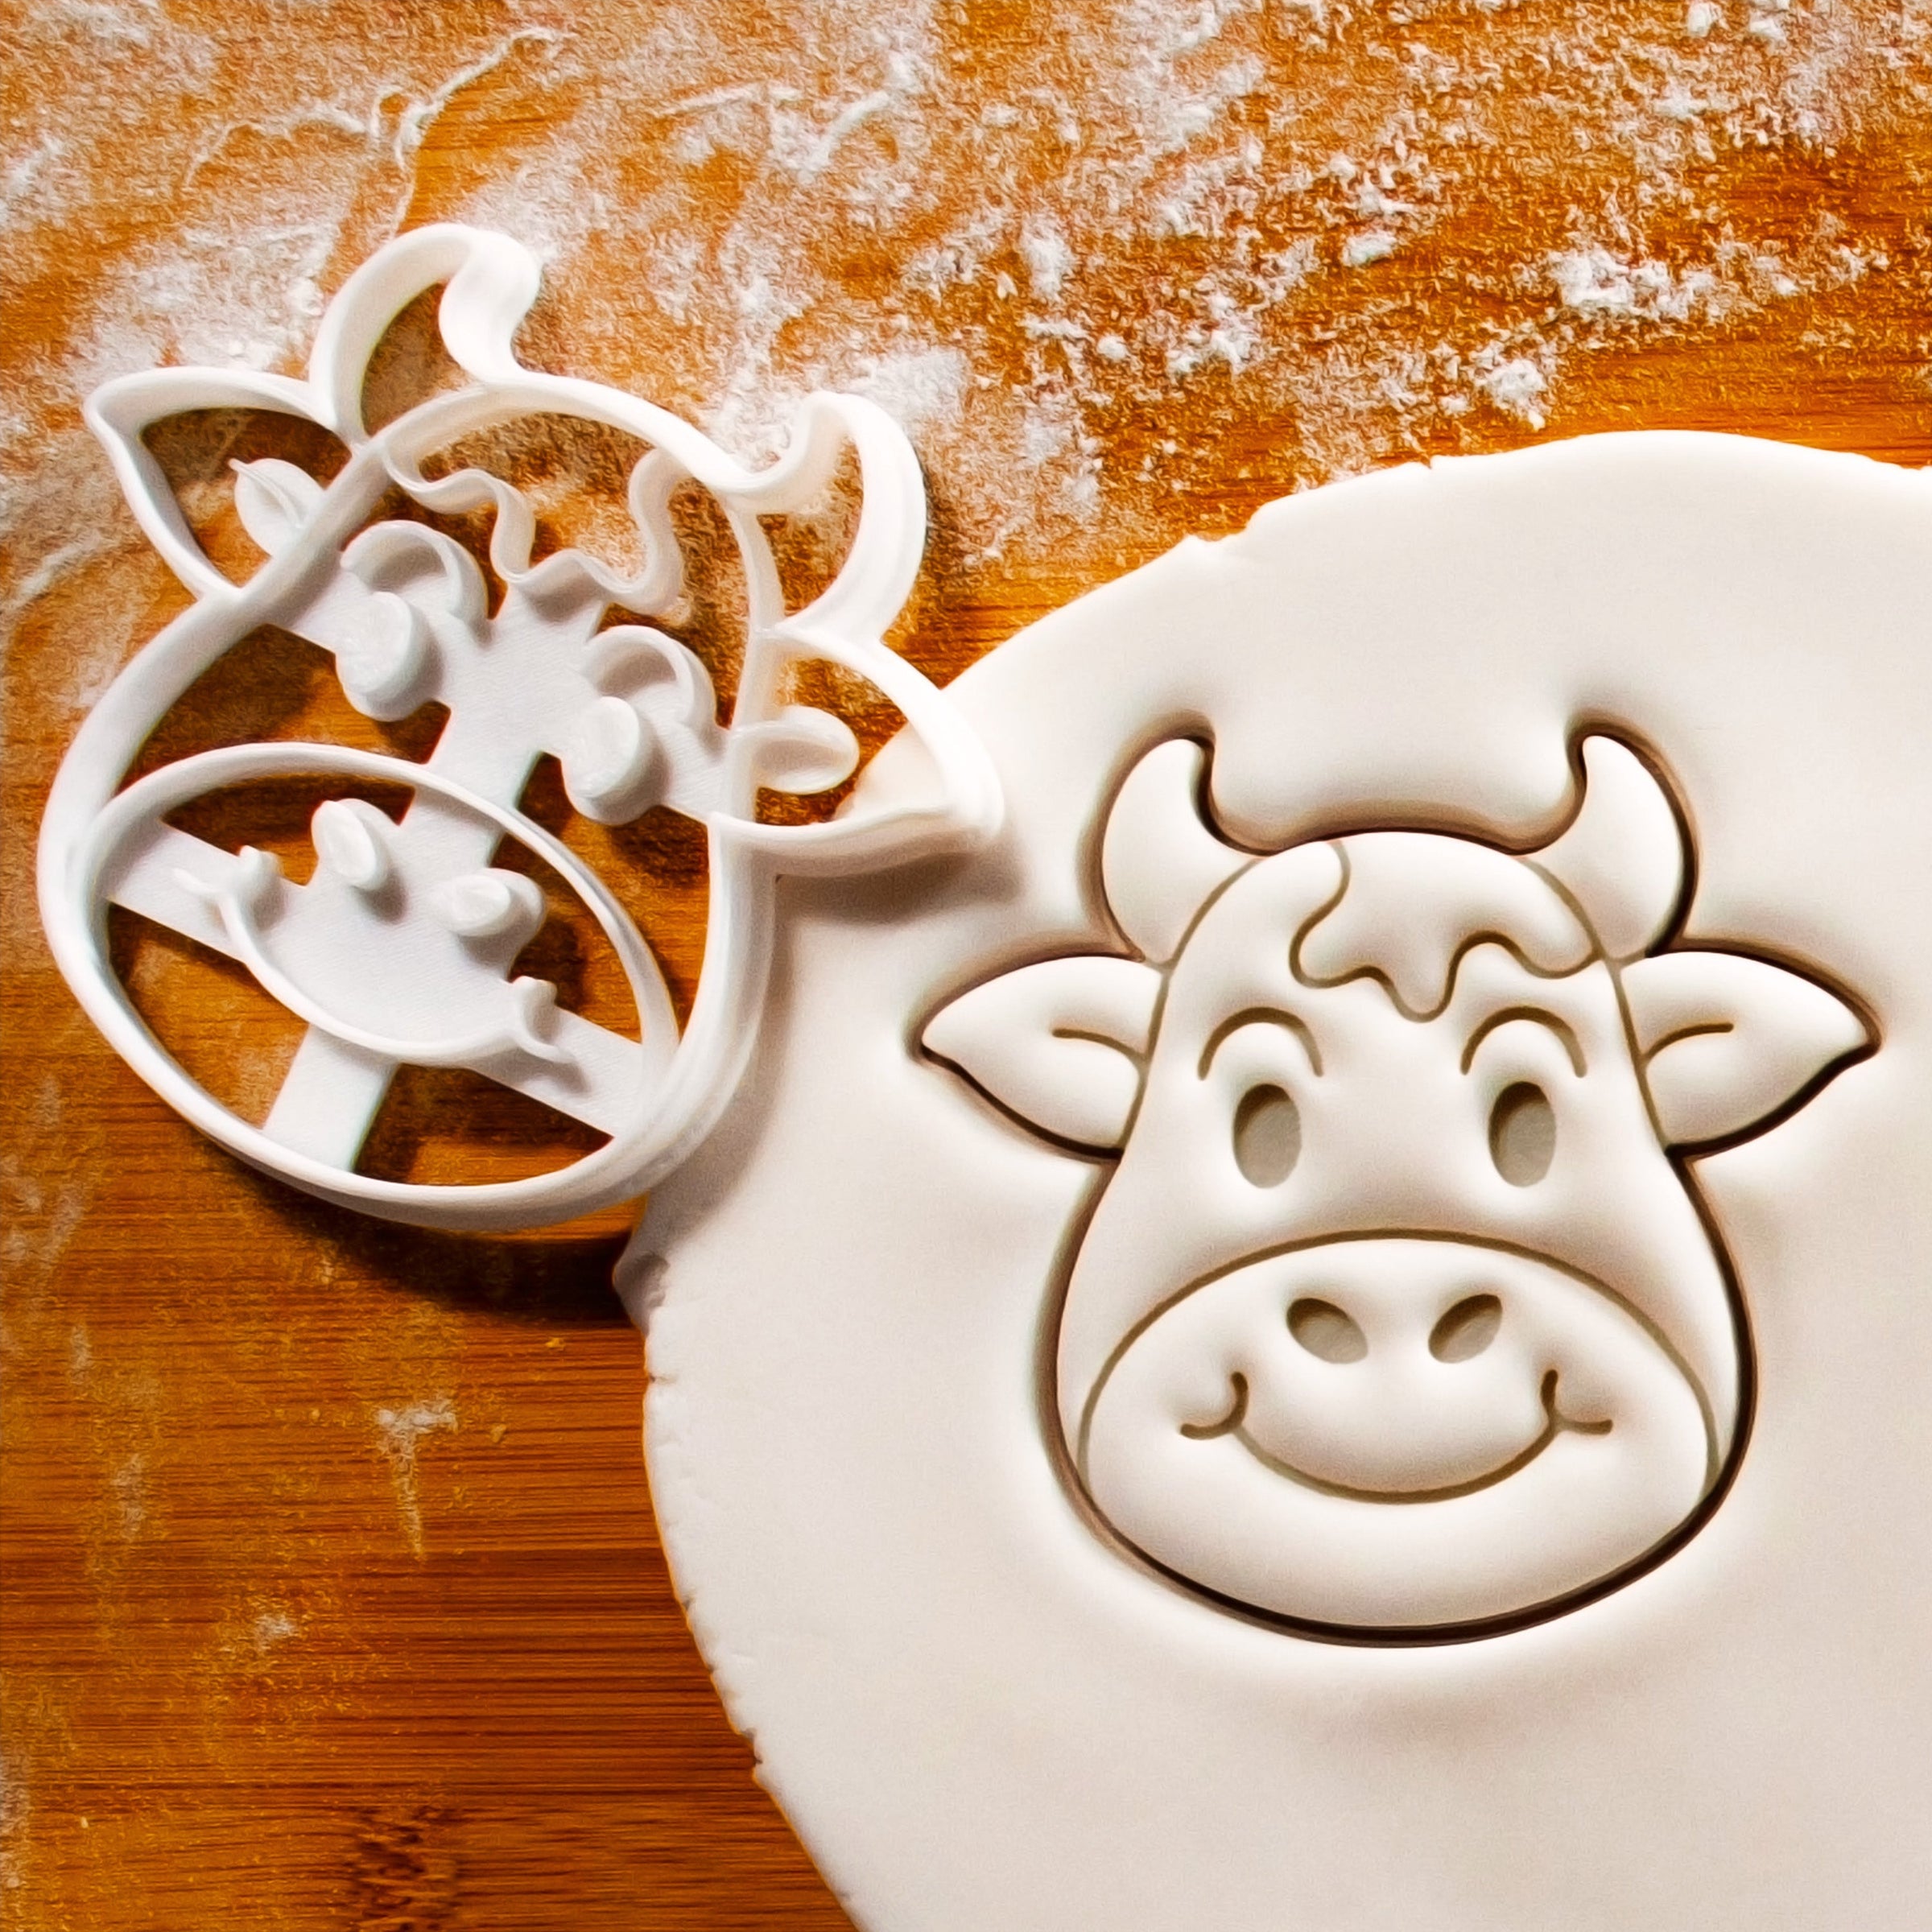 Cheerful Cow Cookie Cutter